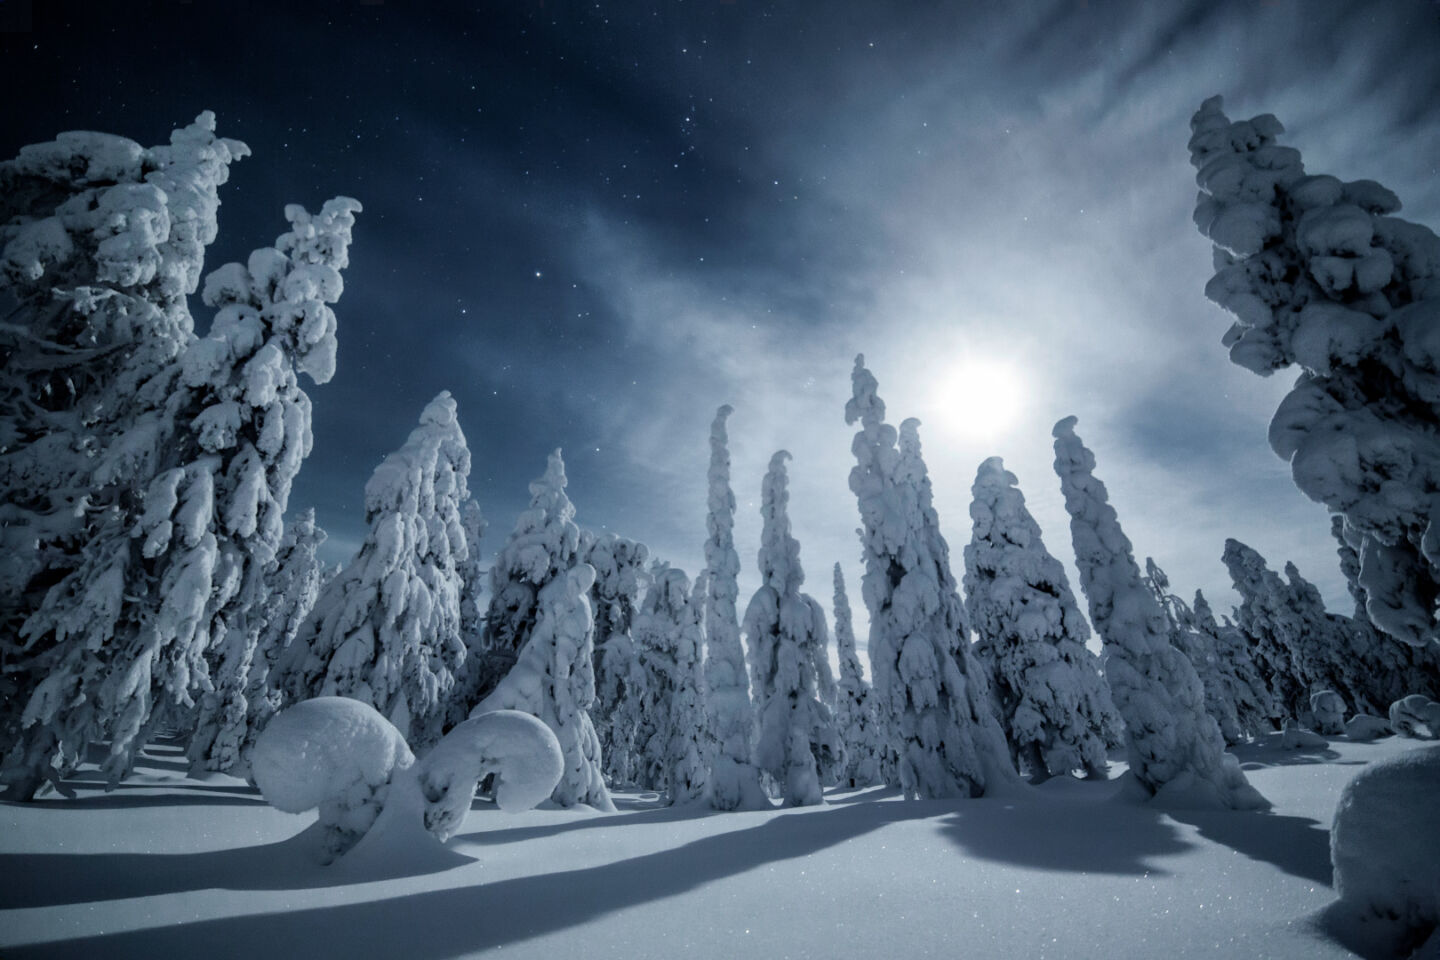 Night-time in Finnish Lapland in the winter often extends well beyond 10 hours.